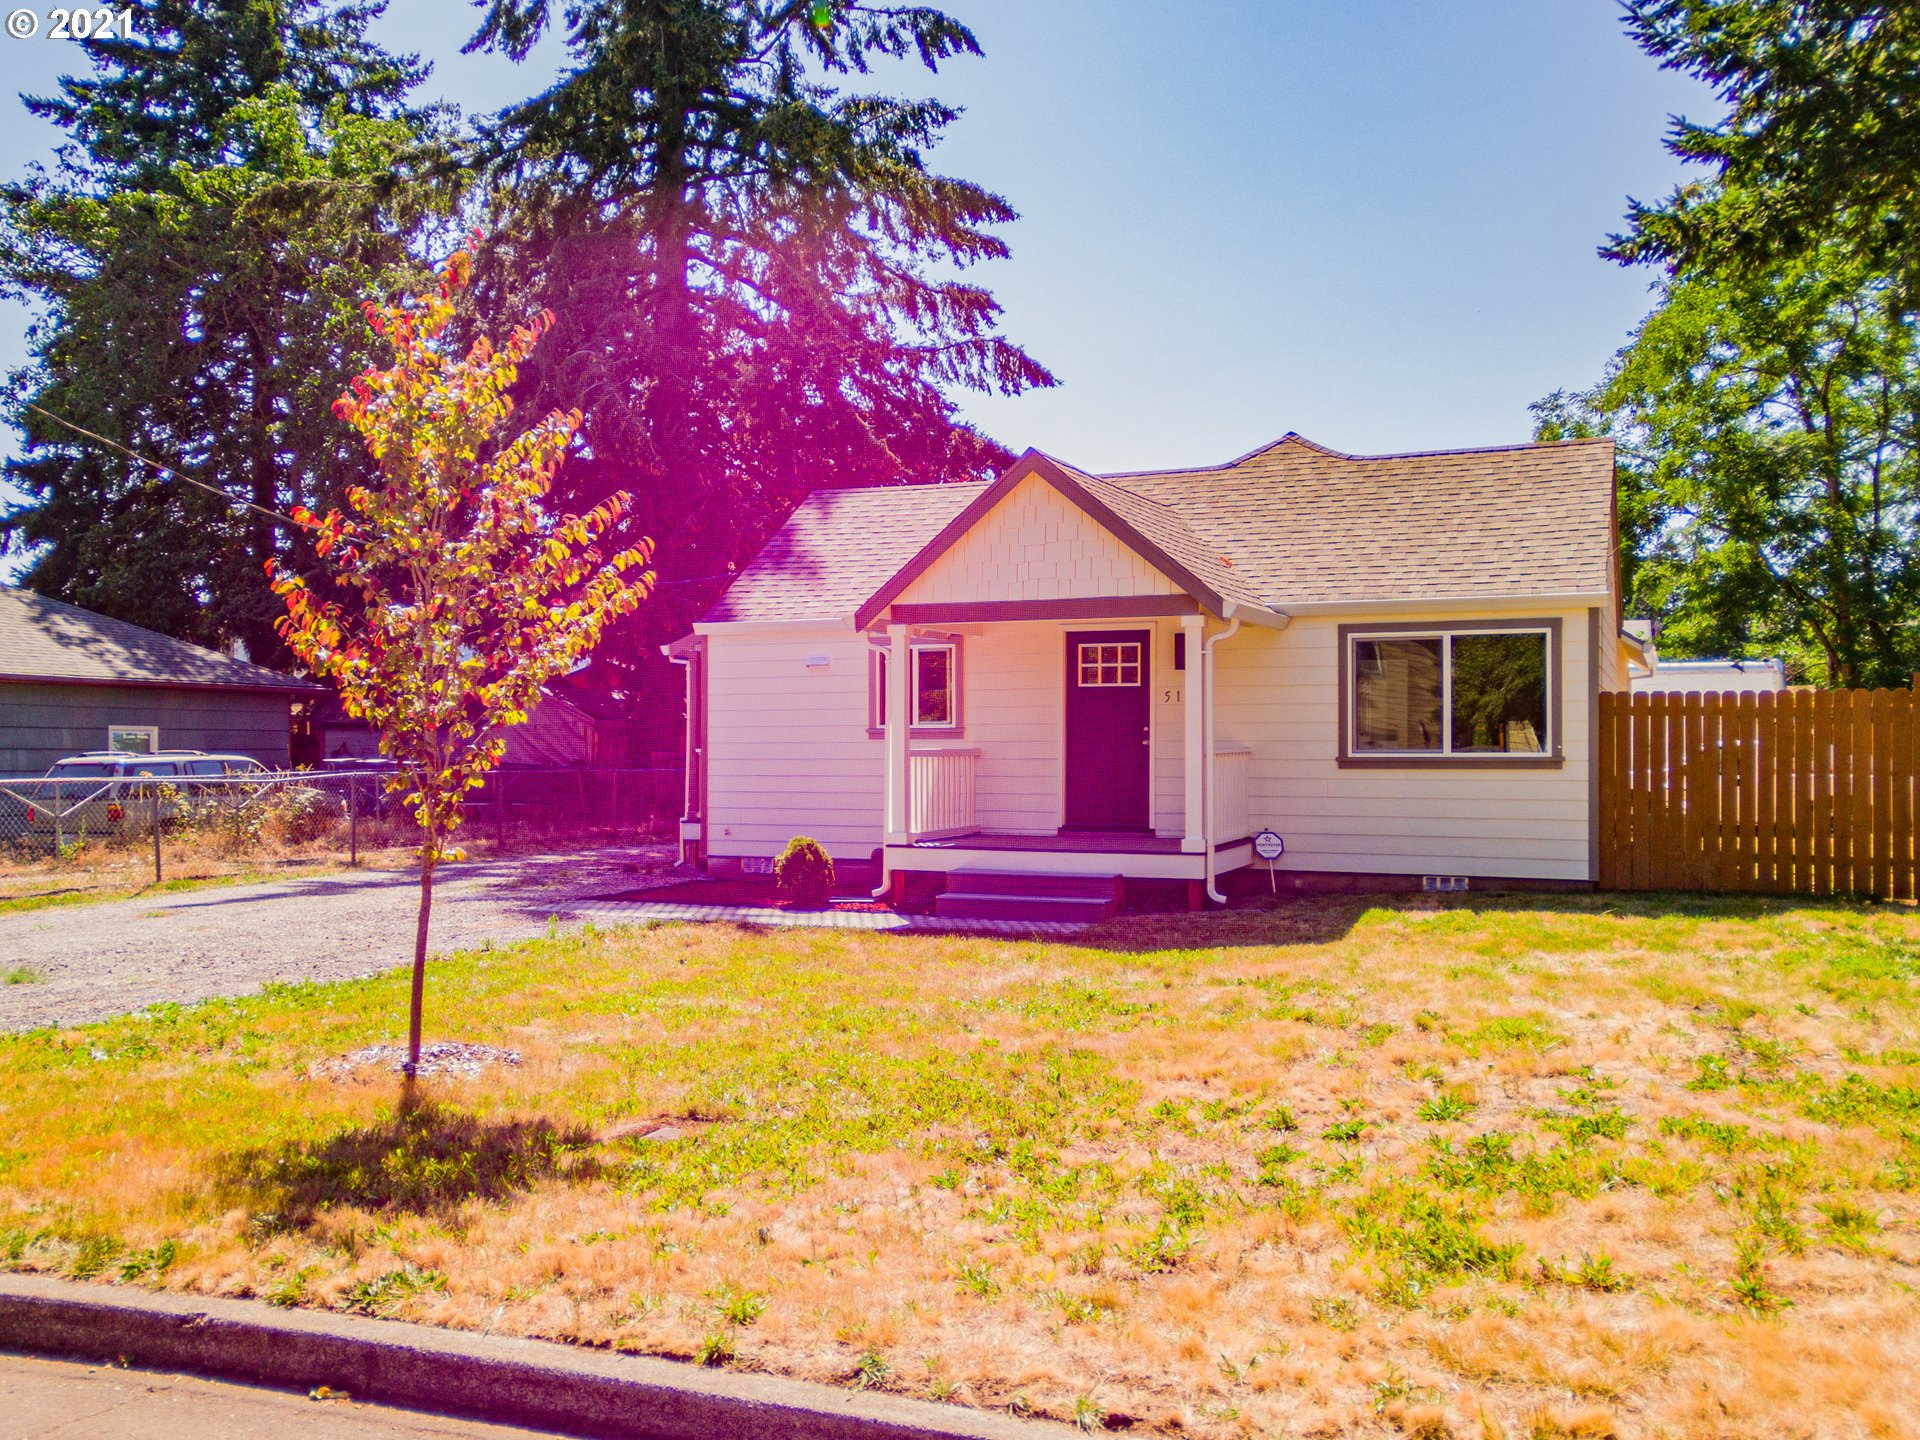 5109 SE 113TH AVE (1 of 13)